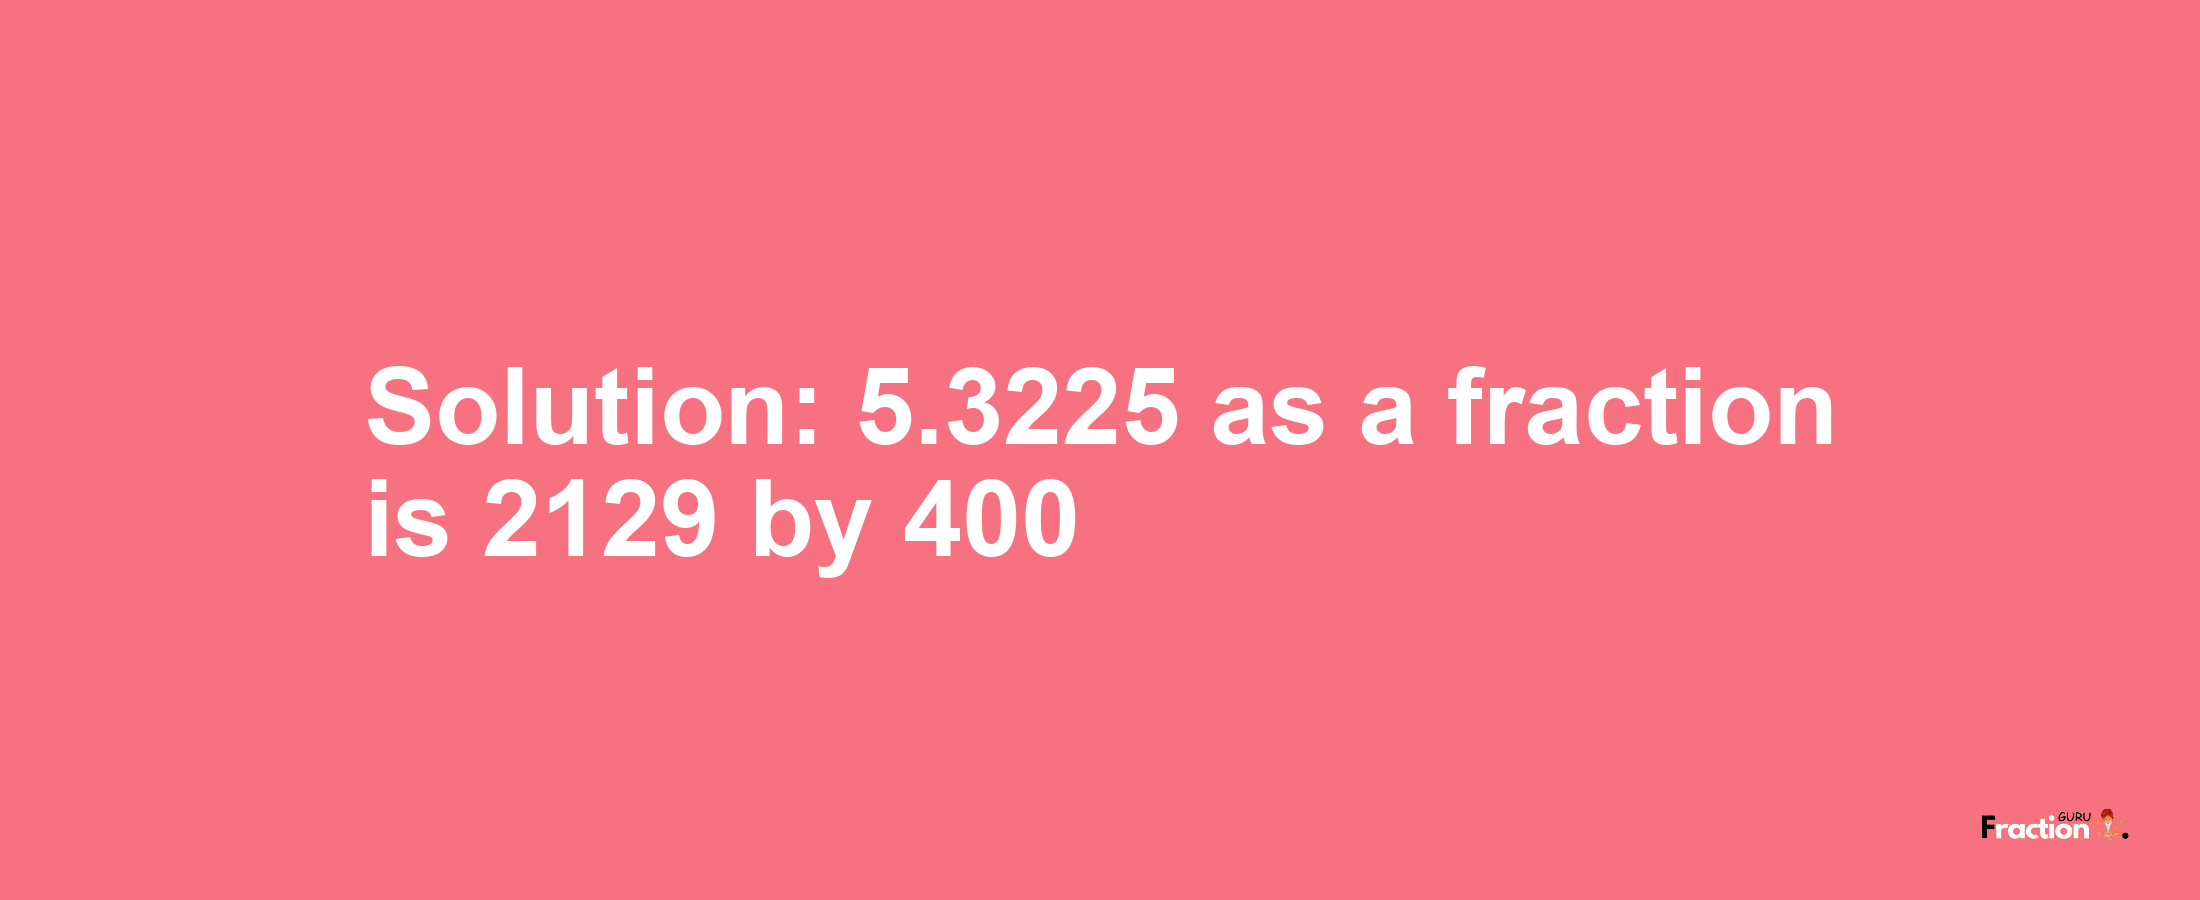 Solution:5.3225 as a fraction is 2129/400